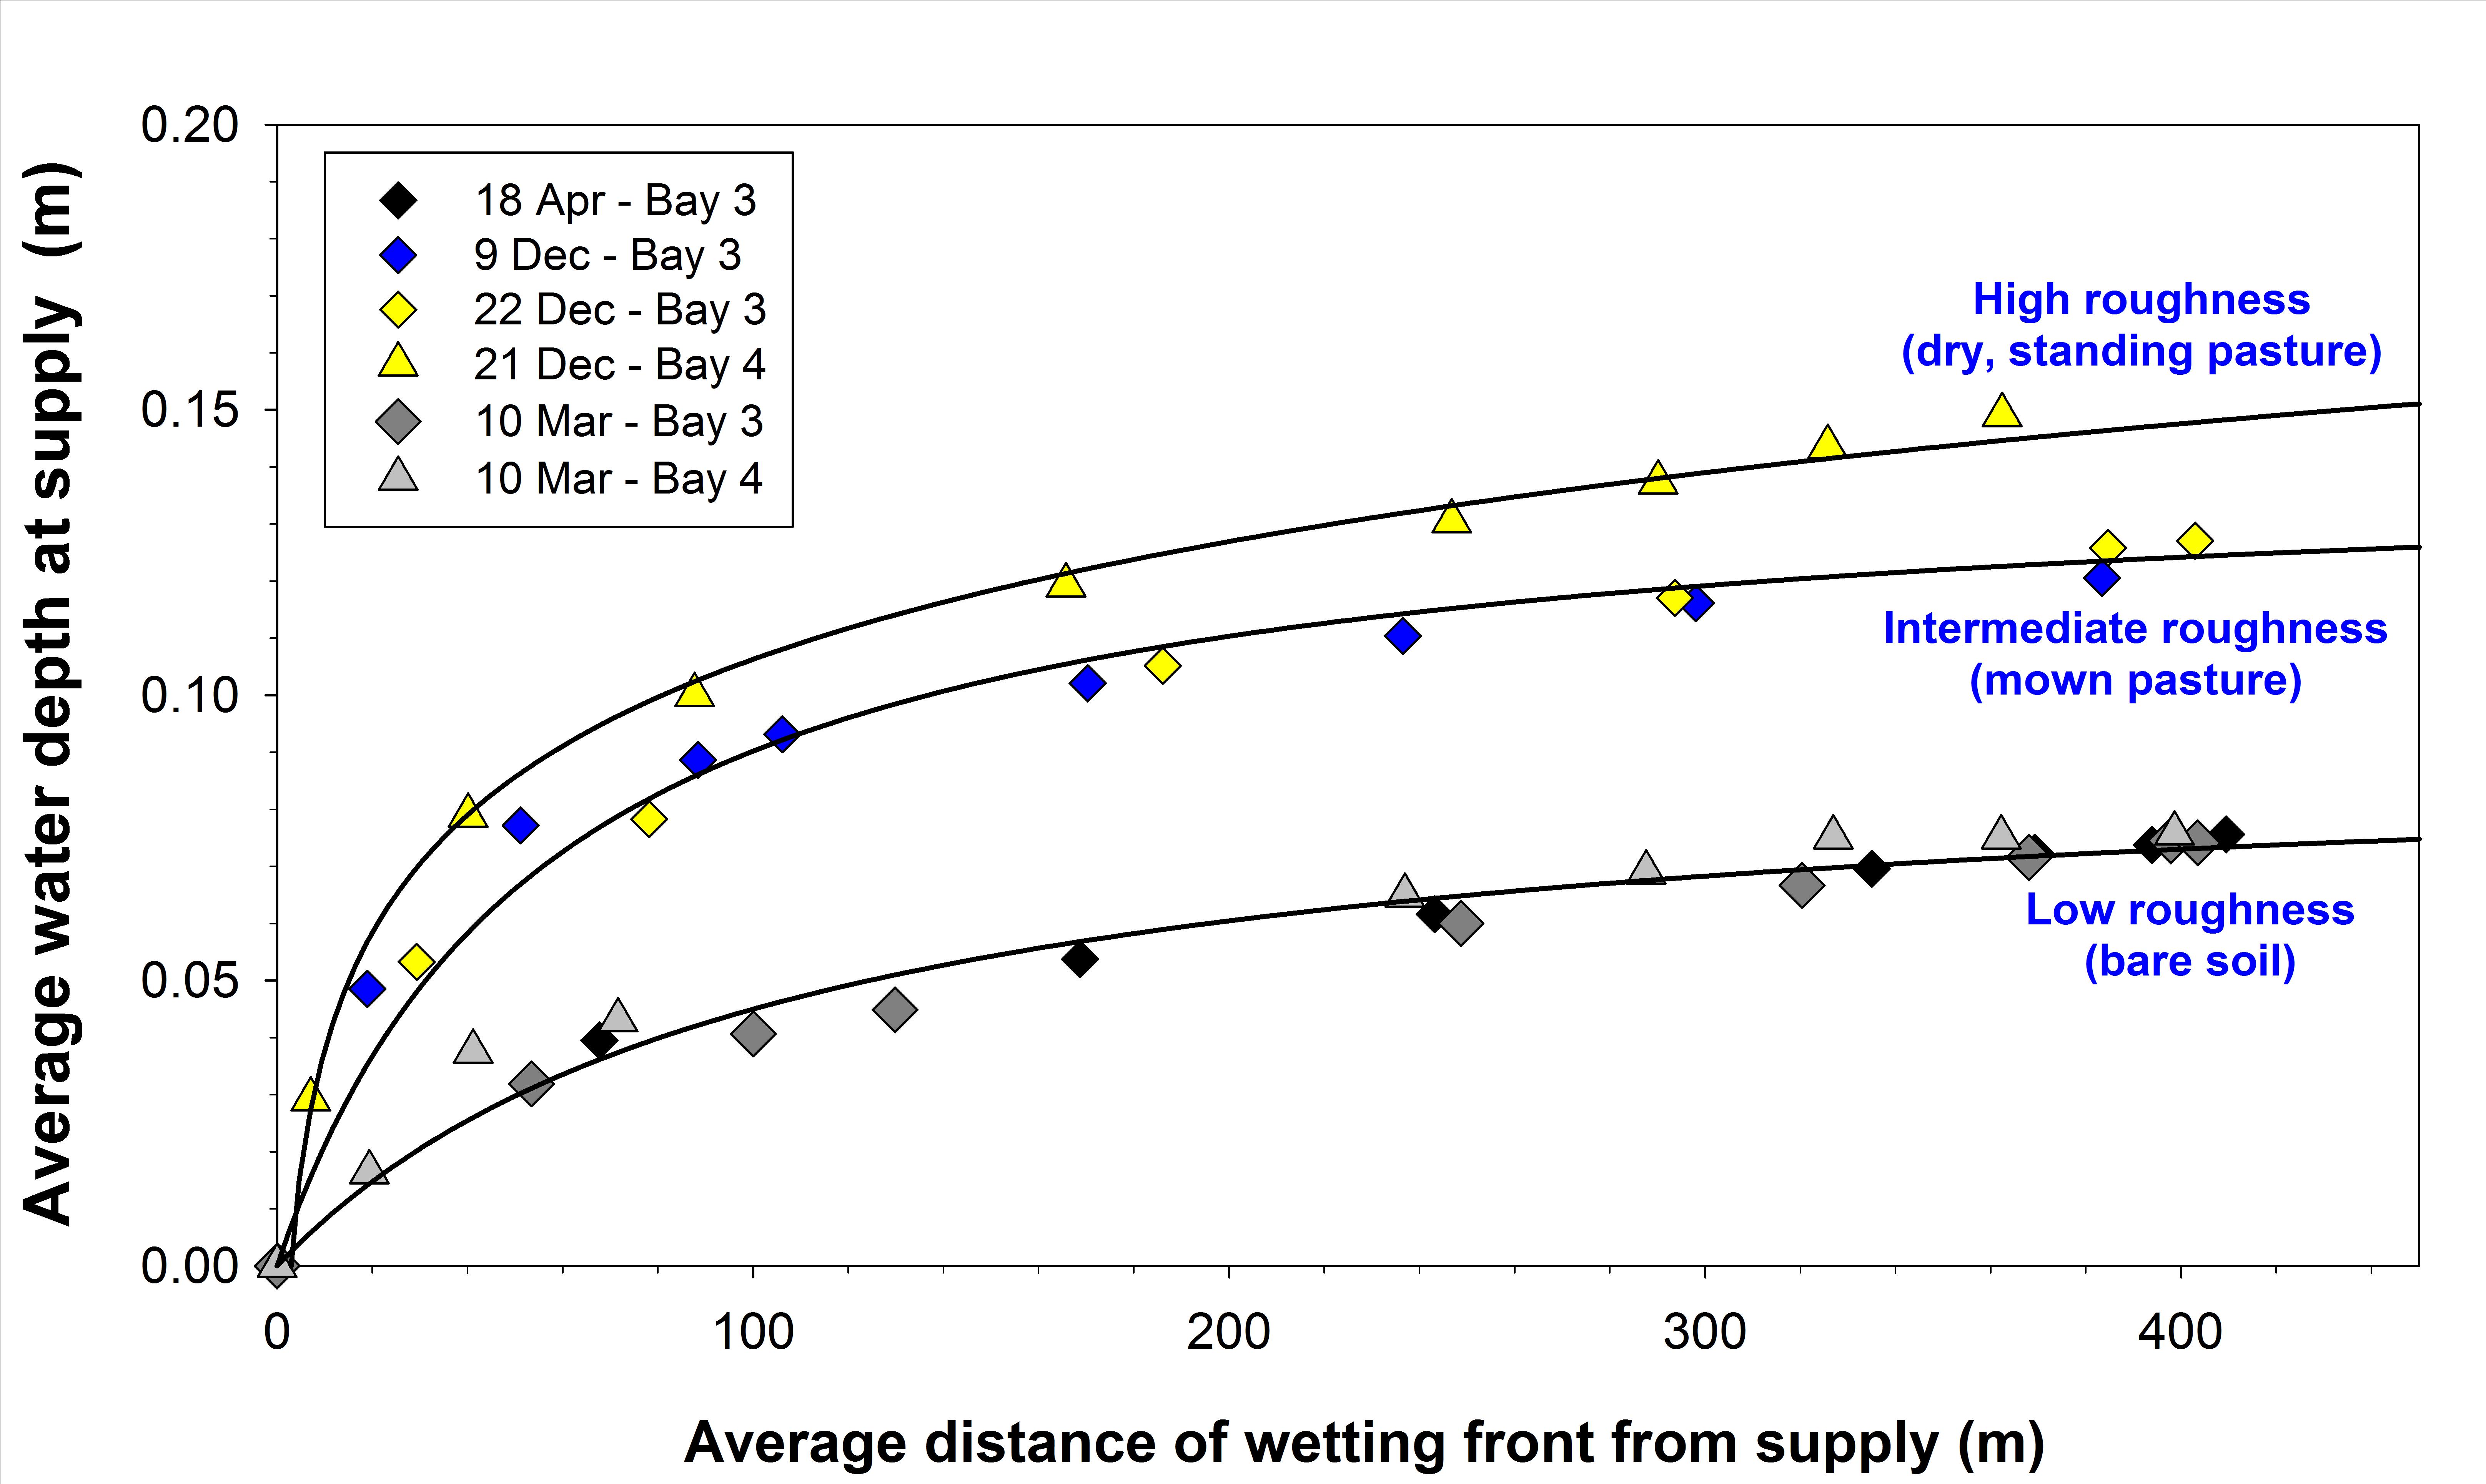 Figure 1. The relationship between the head of water at the supply end of an 85m wide by 410m long bay and the average distance of the wetting front during six irrigations with varying surface roughness conditions in the contour basin system at Deniliquin.